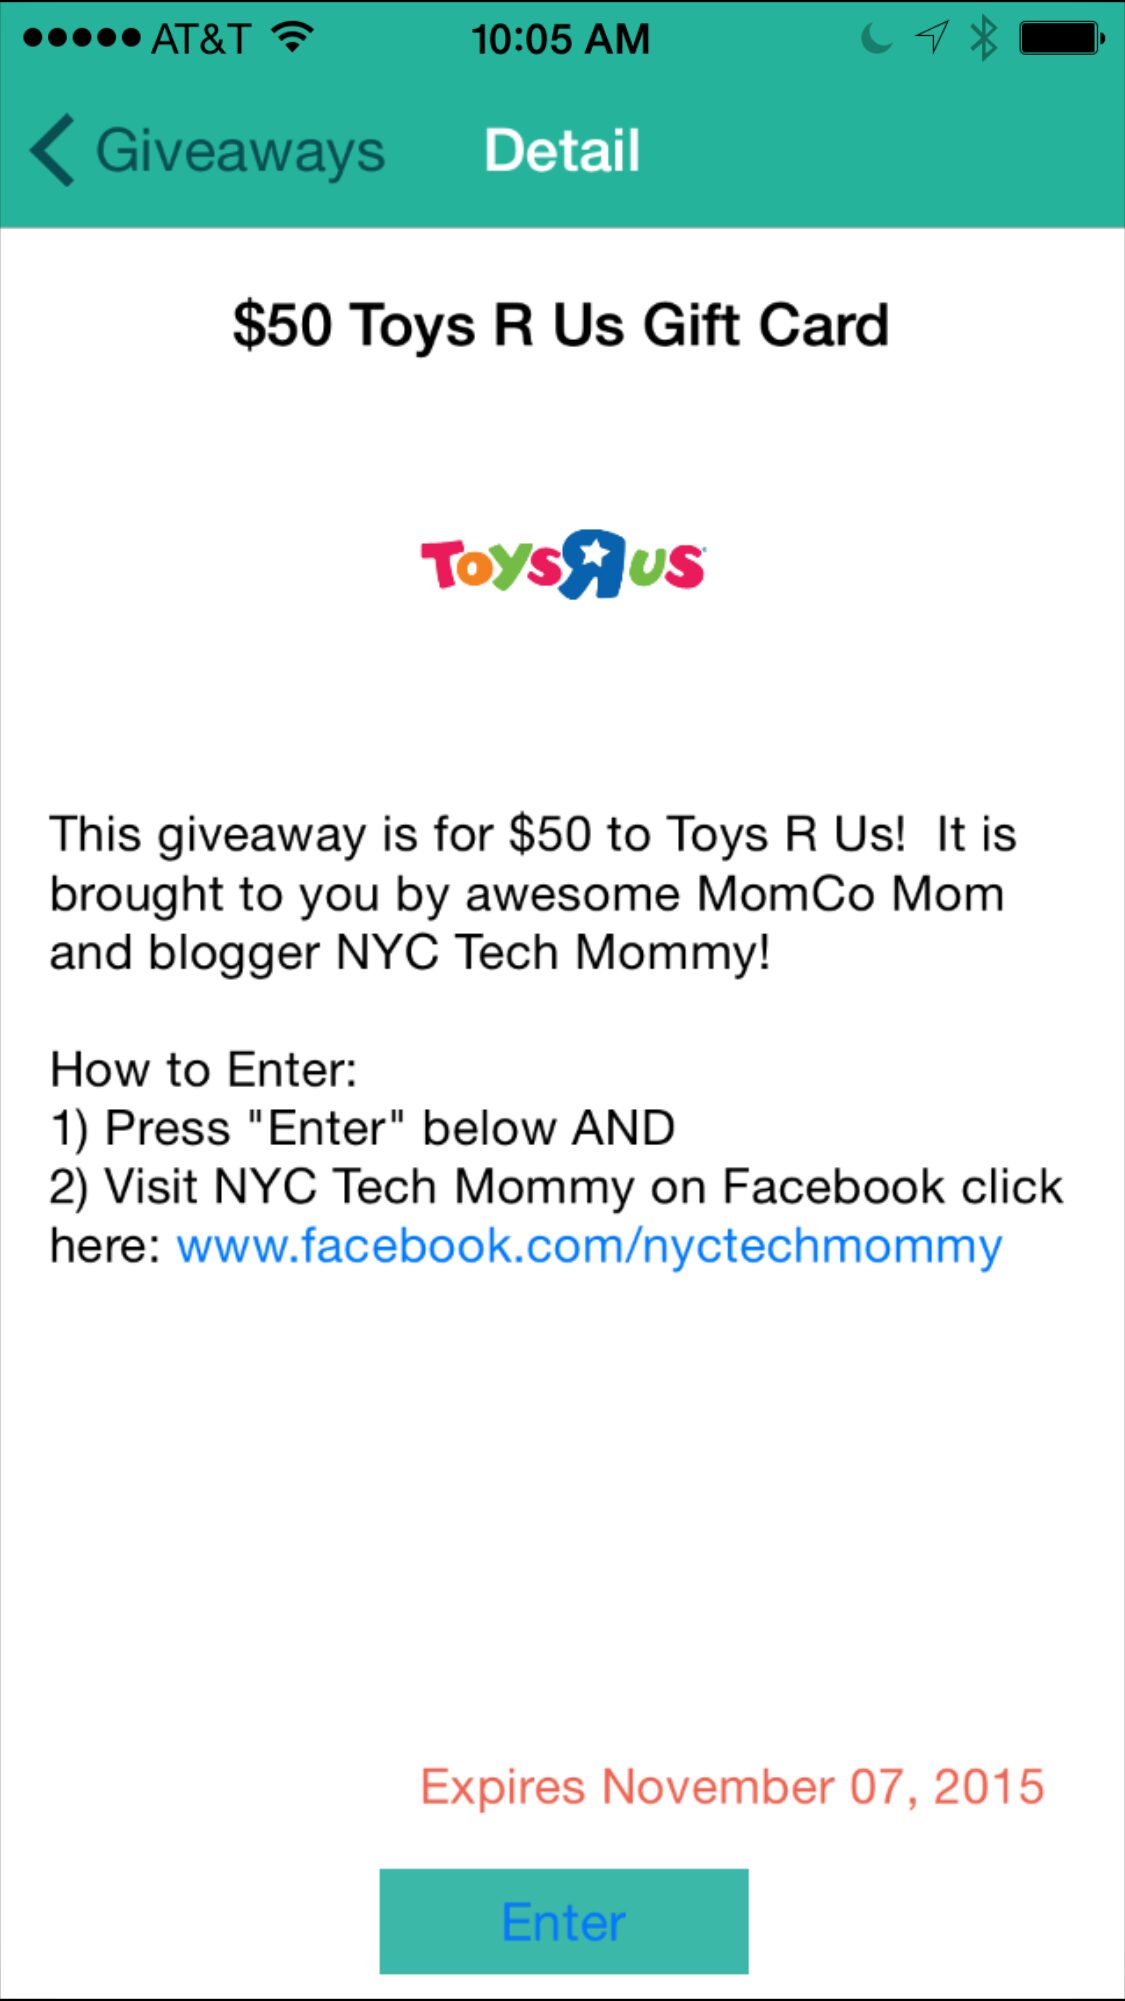 Get your holiday shopping on its way with this $50 Toys R Us Gift Card Giveaway http://wp.me/p5Jjr7-qH